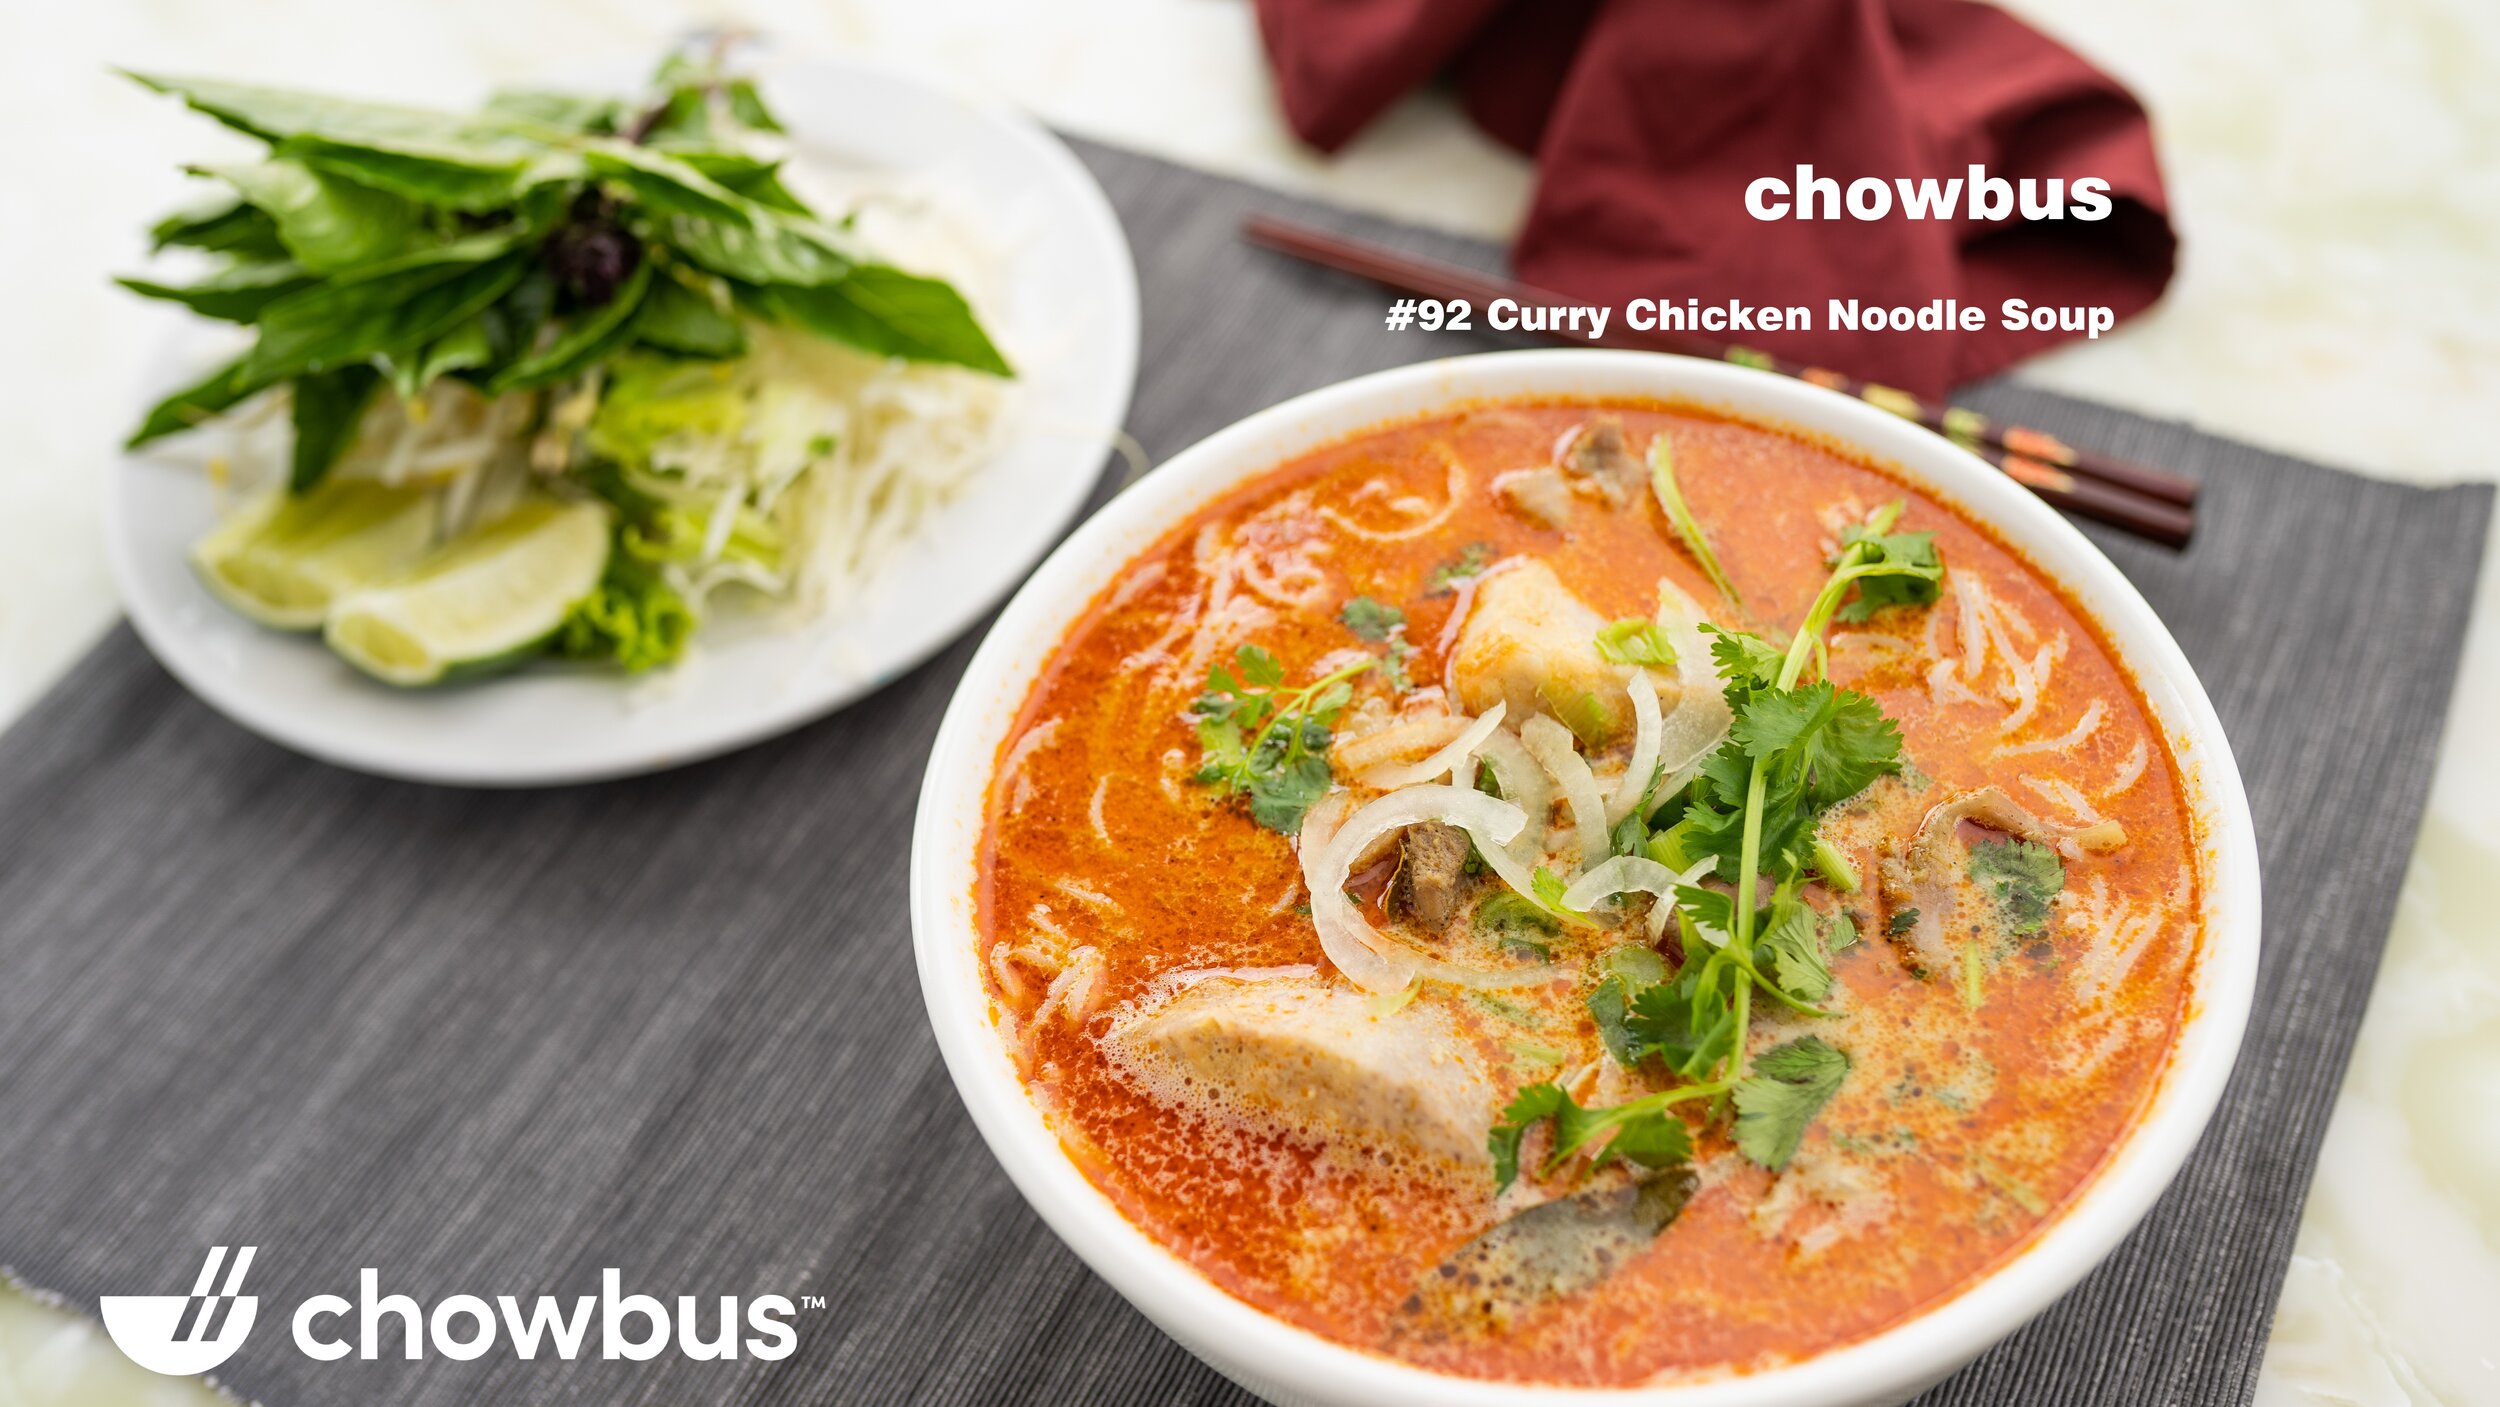 #92 Curry Chicken Noodle Soup